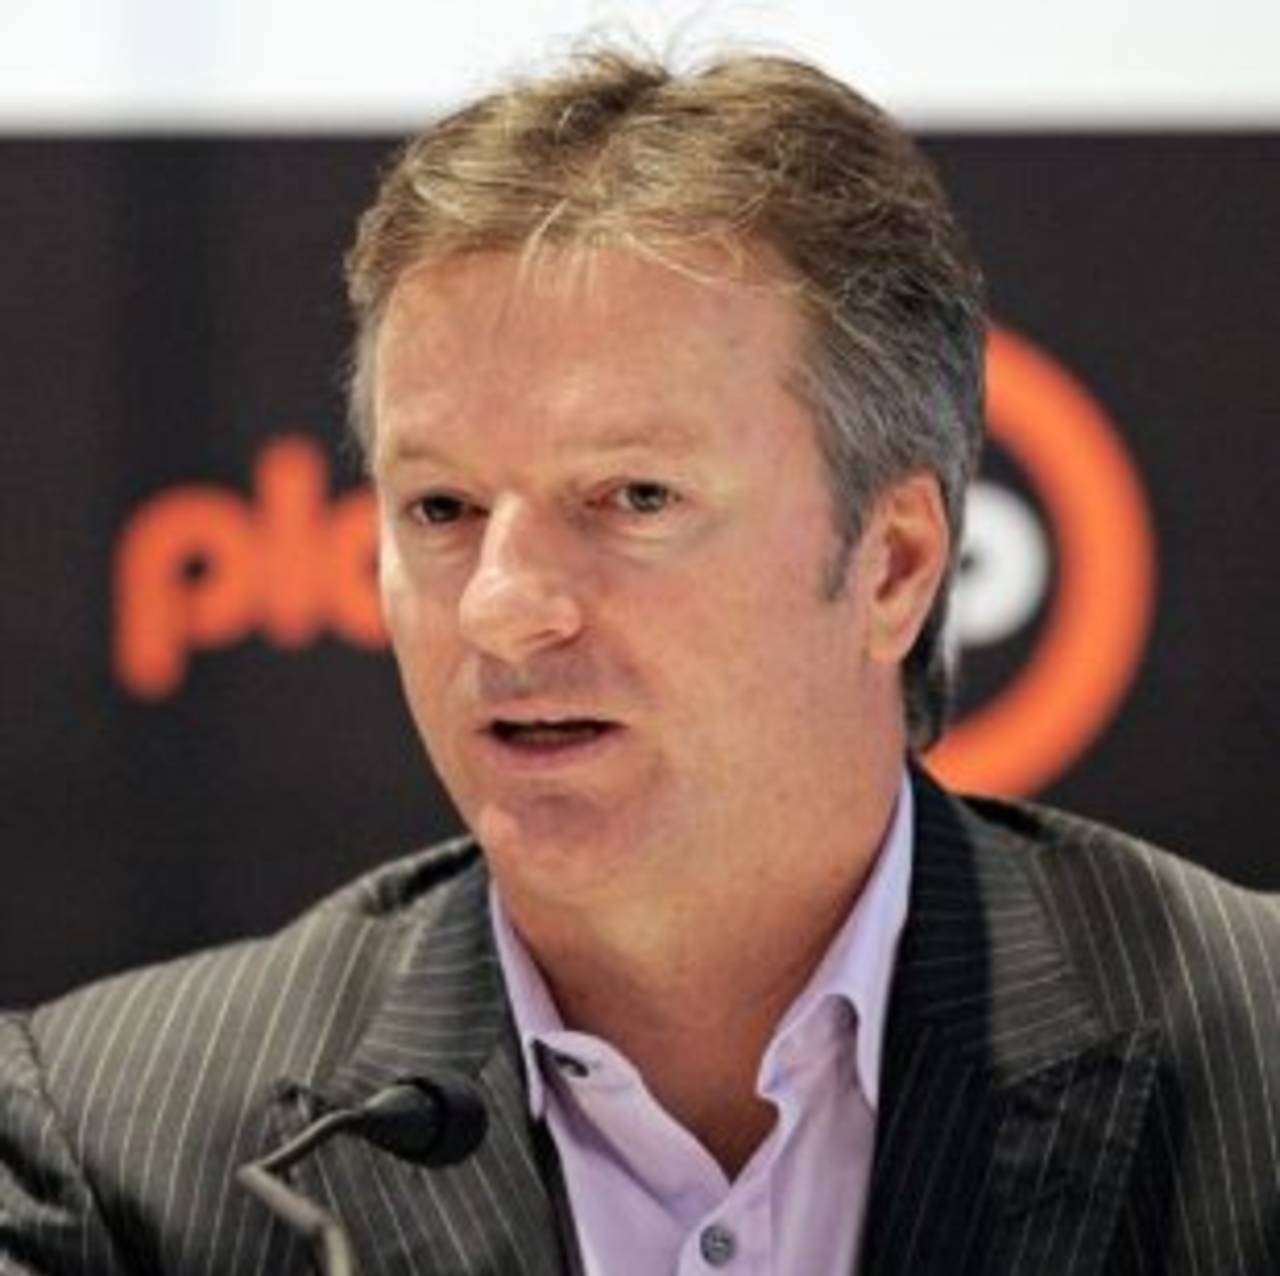 Steve Waugh at the launch of a foundation in his name, Delhi, June 19, 2008